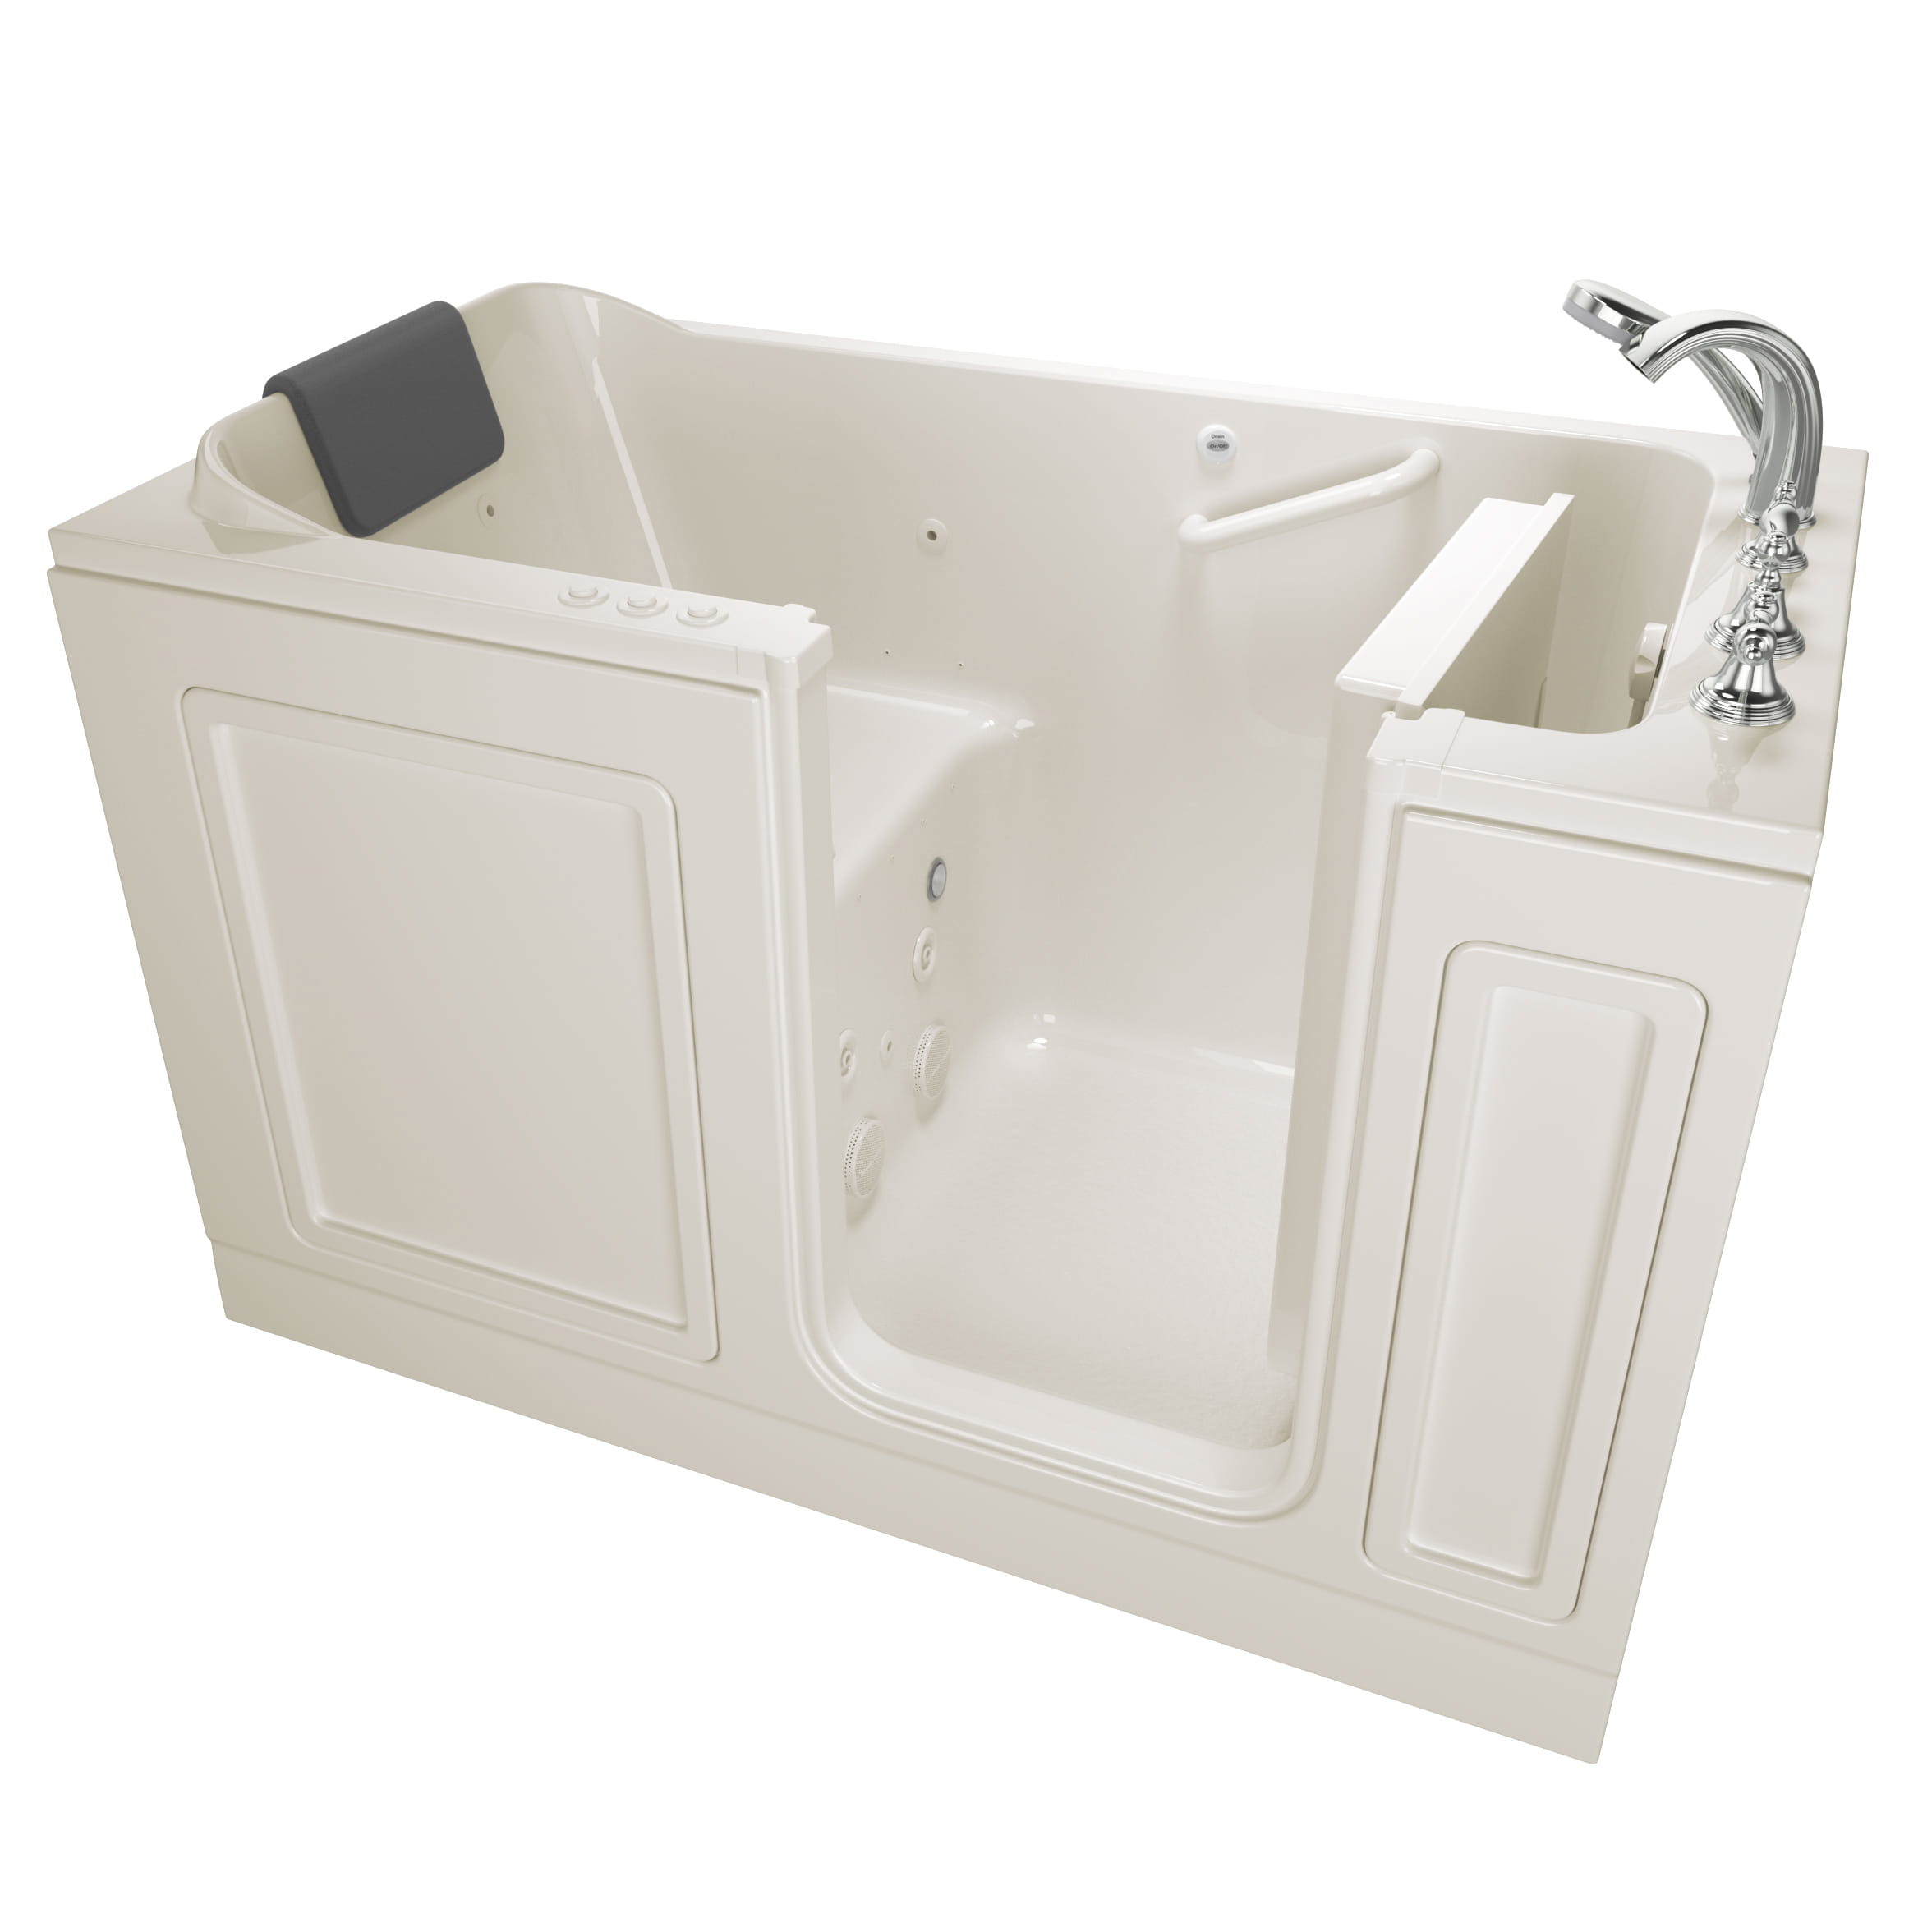 Acrylic Luxury Series 32 x 60 -Inch Walk-in Tub With Combination Air Spa and Whirlpool Systems - Right-Hand Drain With Faucet